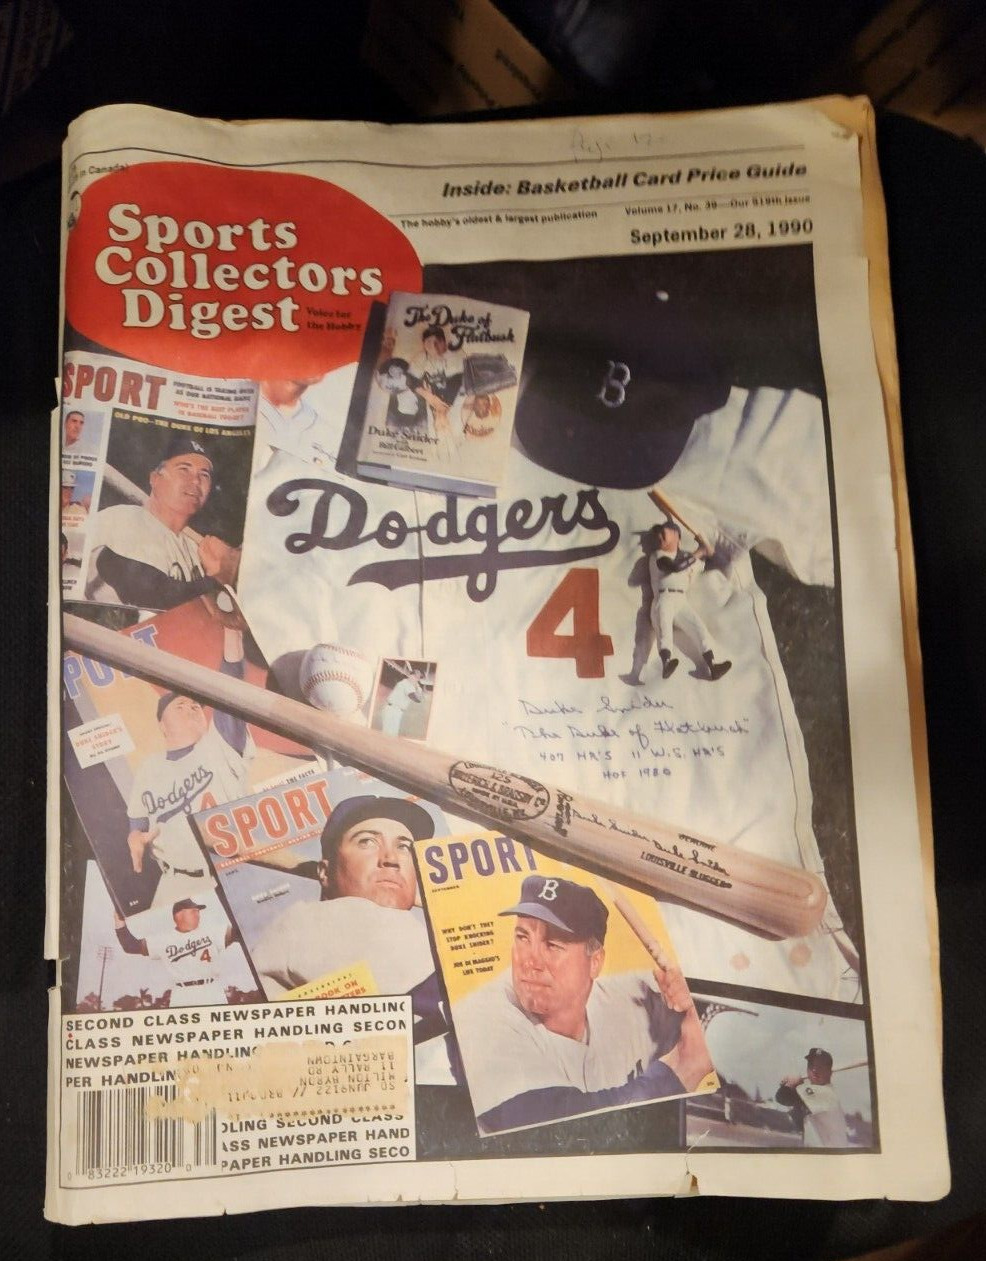 Sports Collectors Digest 9/28/90 Brooklyn Dodgers Duke Snider cover